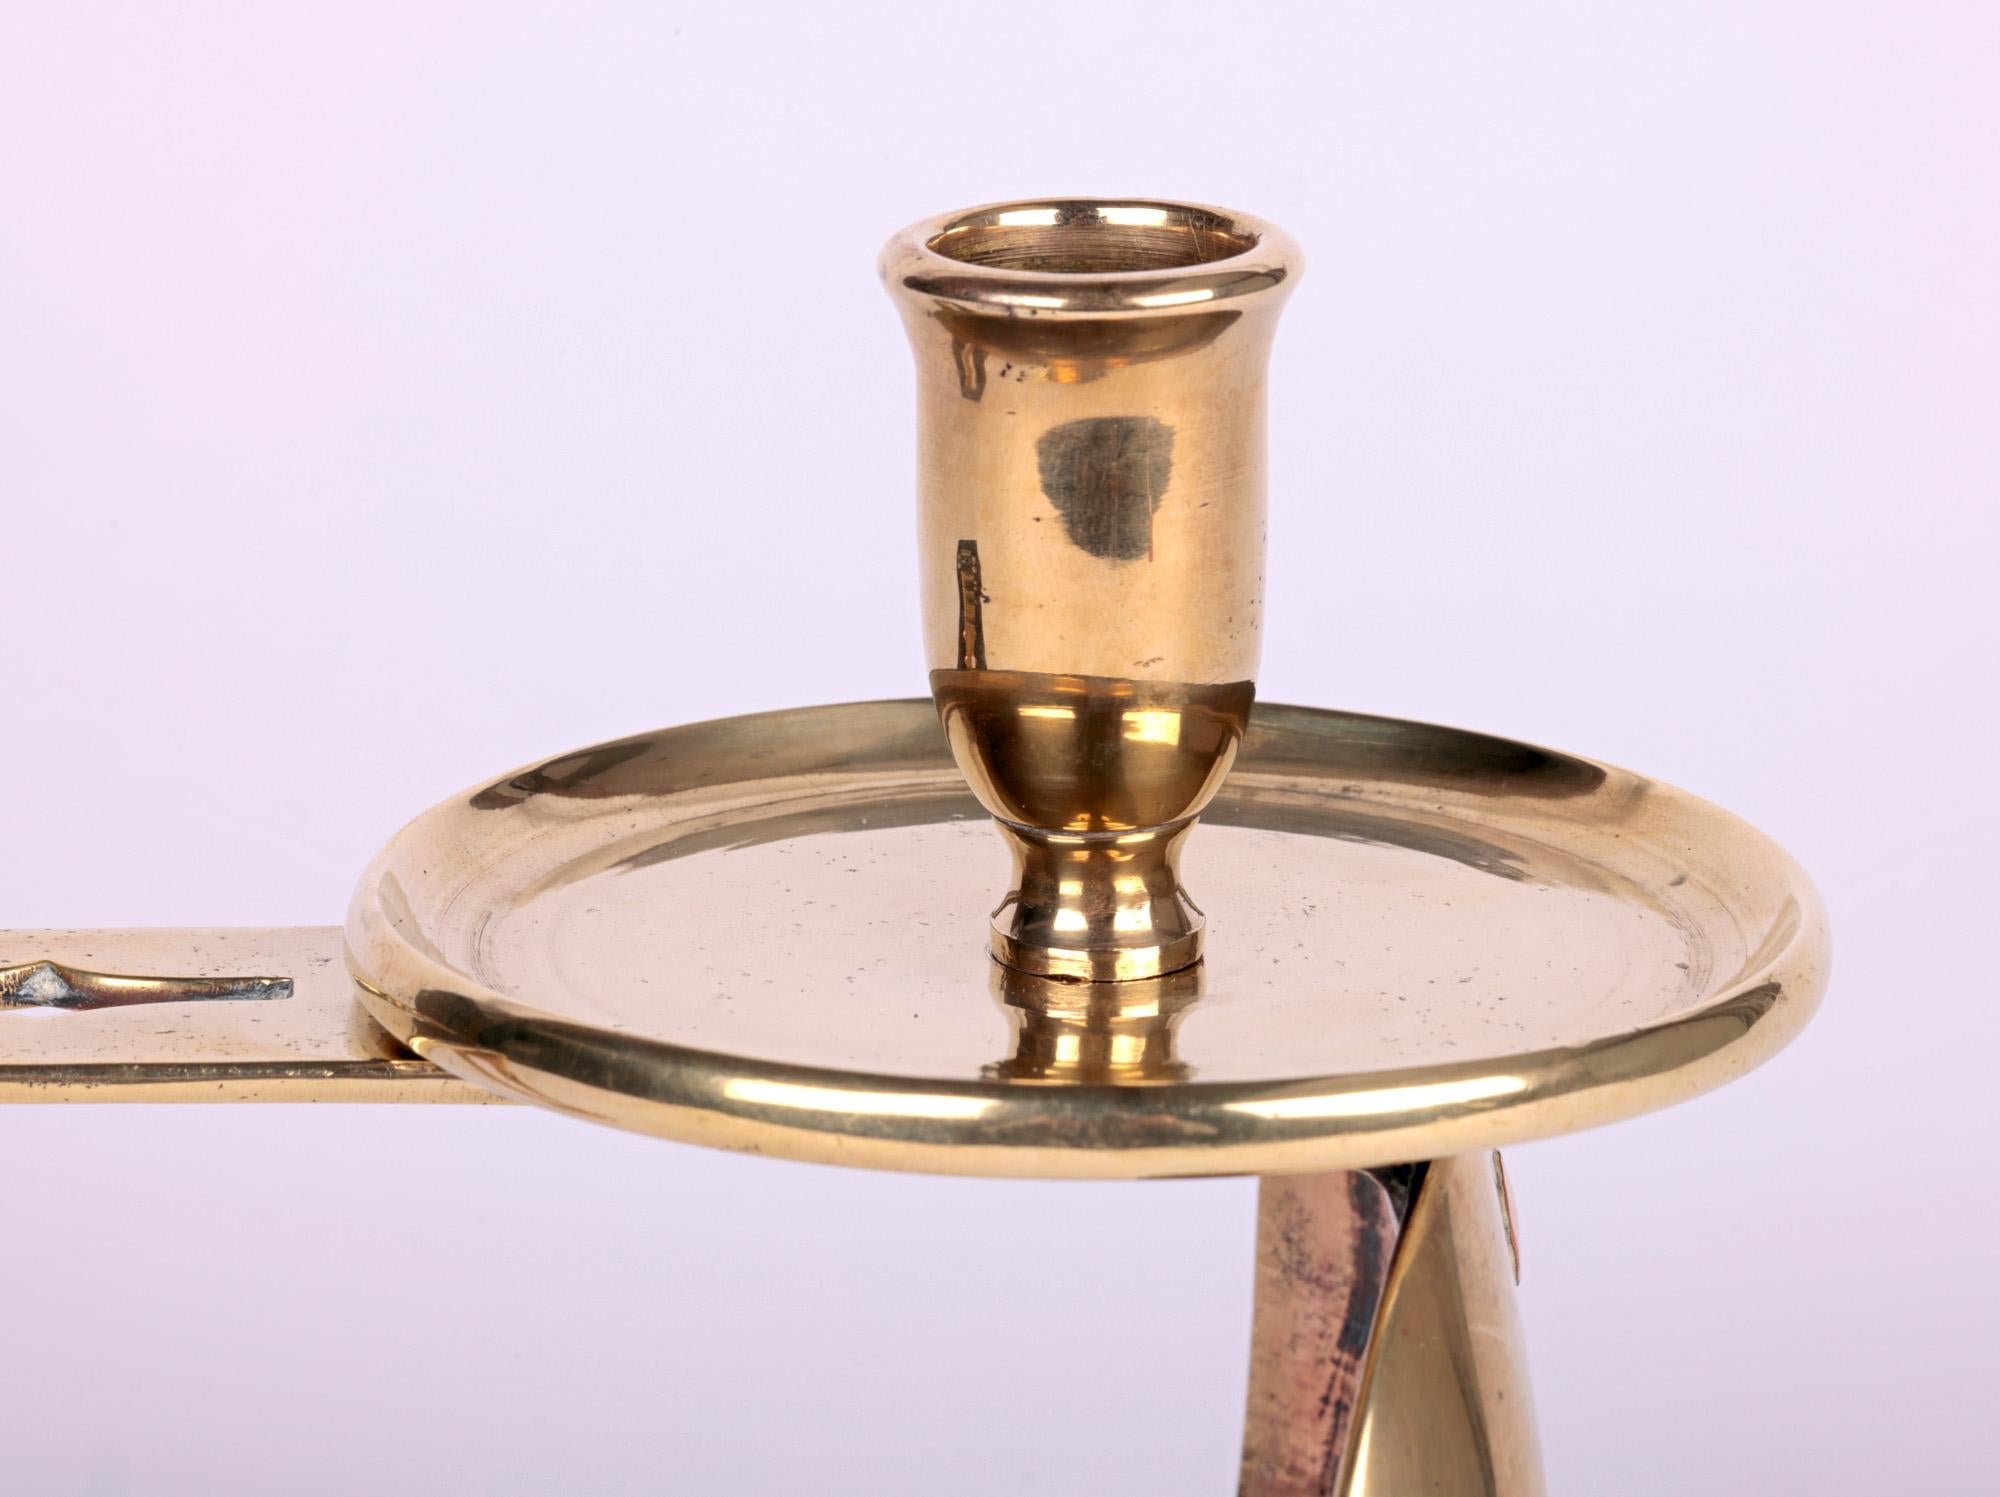 An unusual Arts & Crafts brass chamberstick attributed to C.F.A. Voysey and made by Edward Barnard & Son with date marks for 1910. This stylish and heavily made Edwardian brass chamberstick has a wide round top with raised central candle holder and